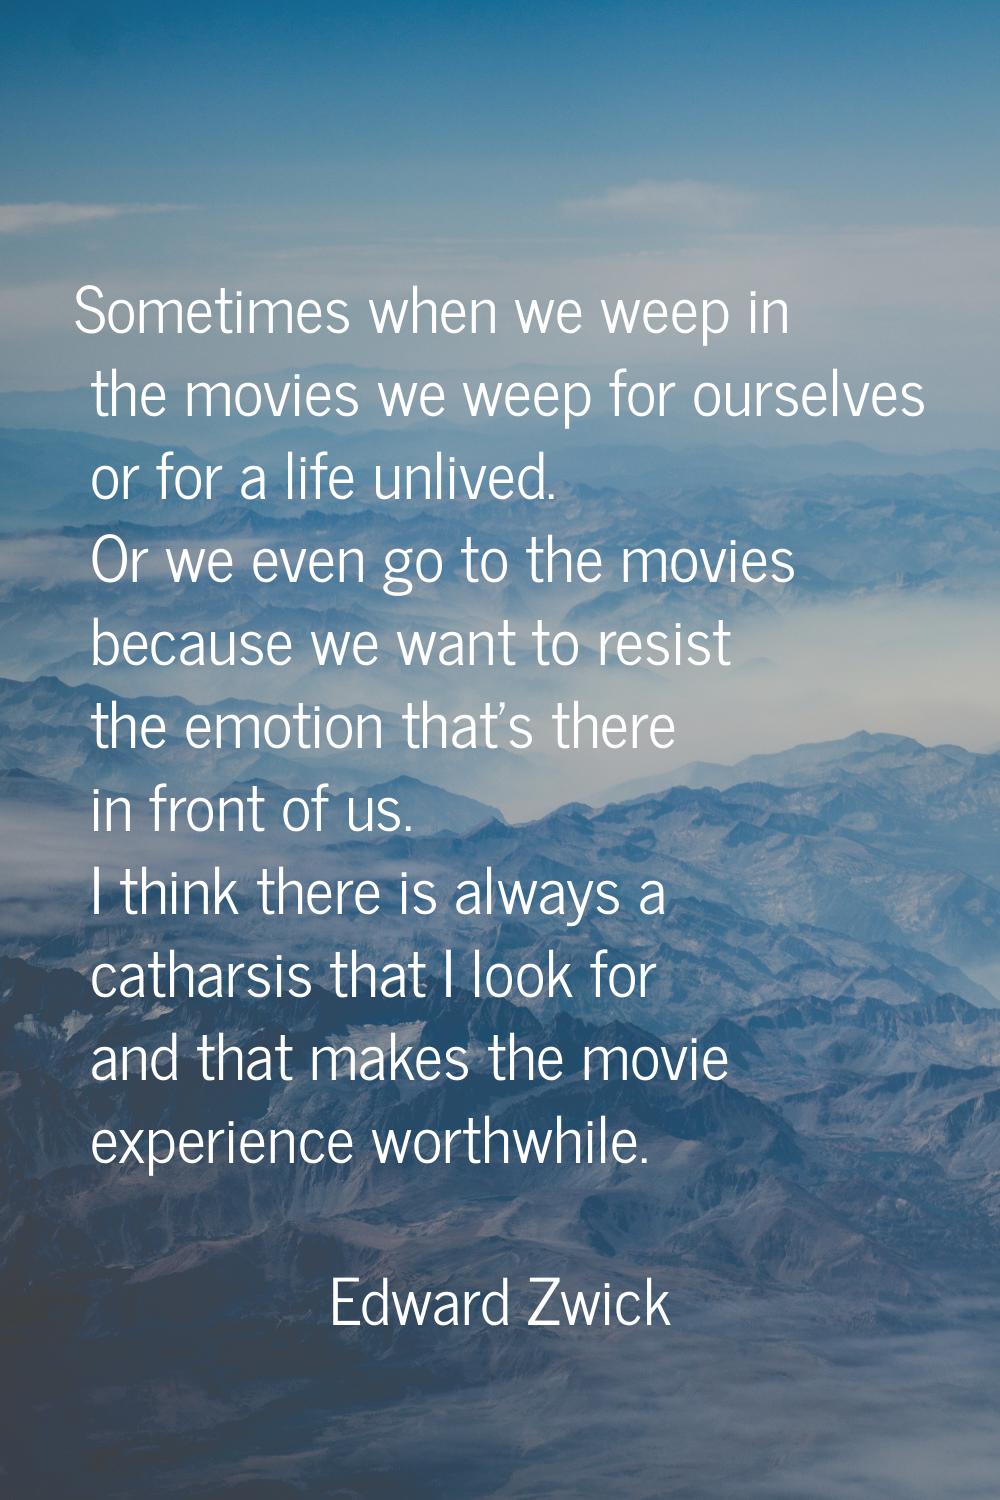 Sometimes when we weep in the movies we weep for ourselves or for a life unlived. Or we even go to 